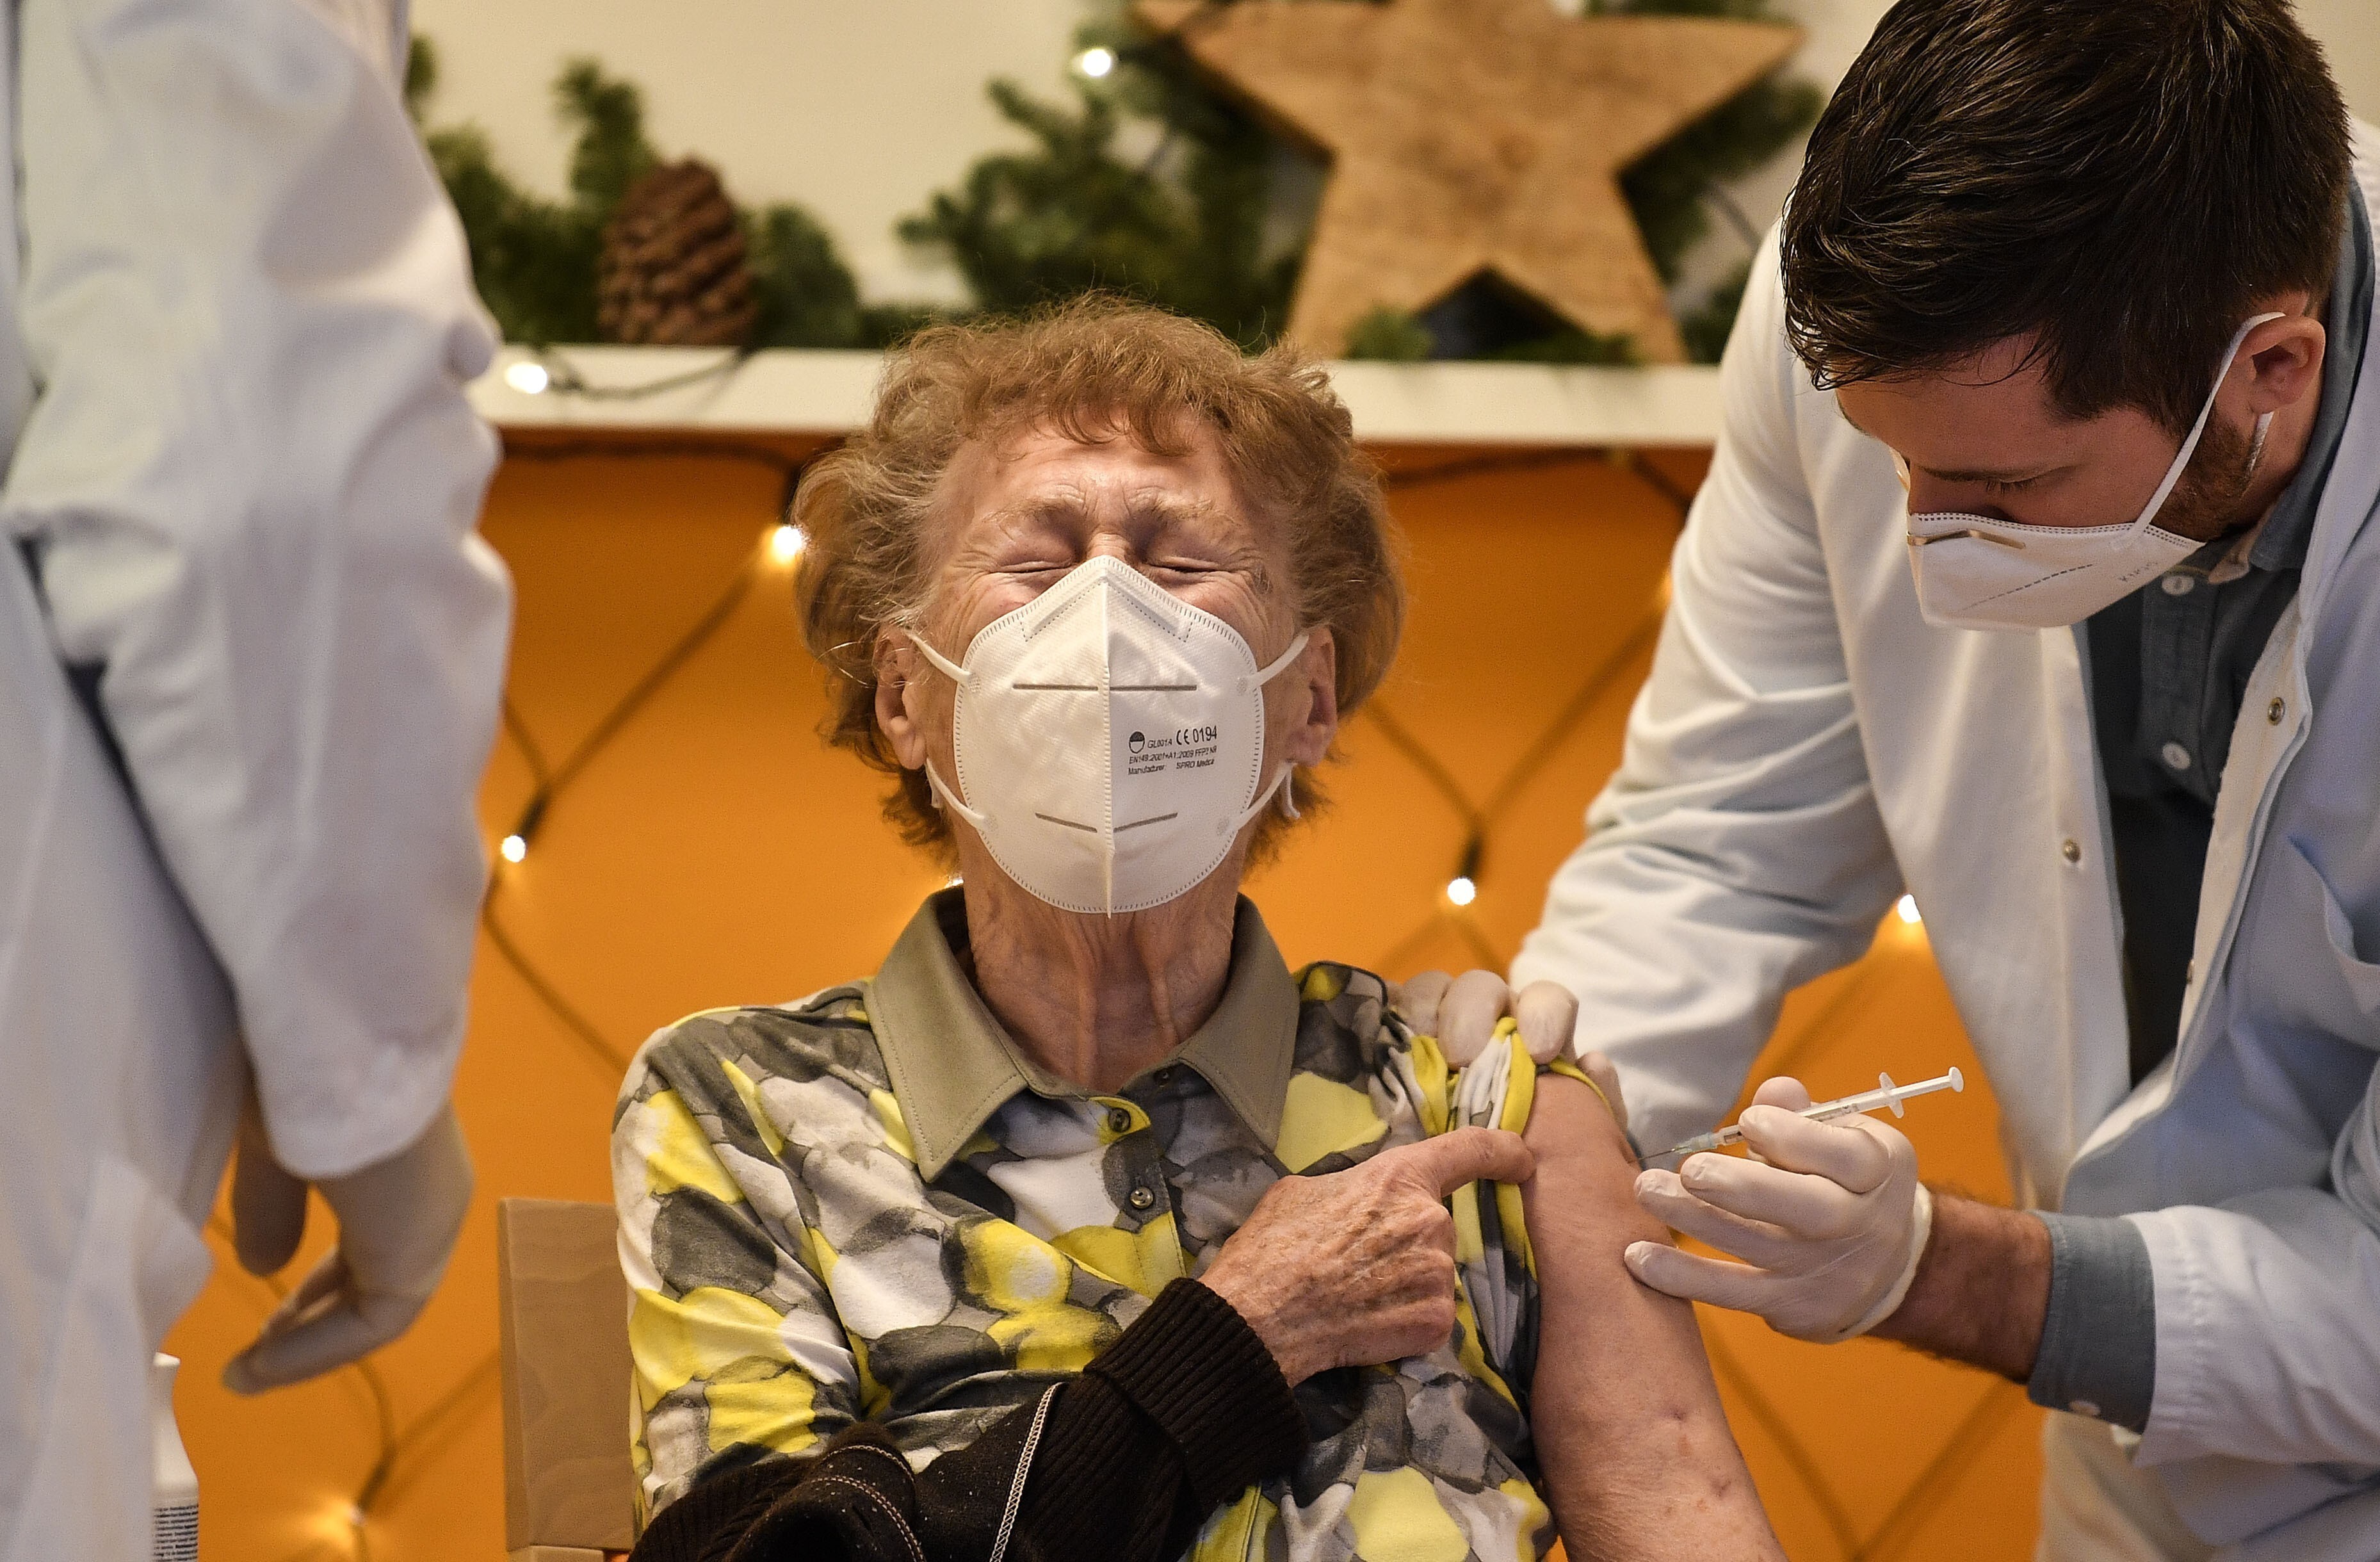 A resident of a nursing home gets a Covid-19 vaccine jab in Cologne, Germany, on December 27. With Europeans and North Americans now rolling up their sleeves to receive coronavirus vaccines, the route out of the pandemic now seems clear to many in the West, even if the roll-out will take many months. But for poorer countries, the road will be far longer and rougher. Photo: AP